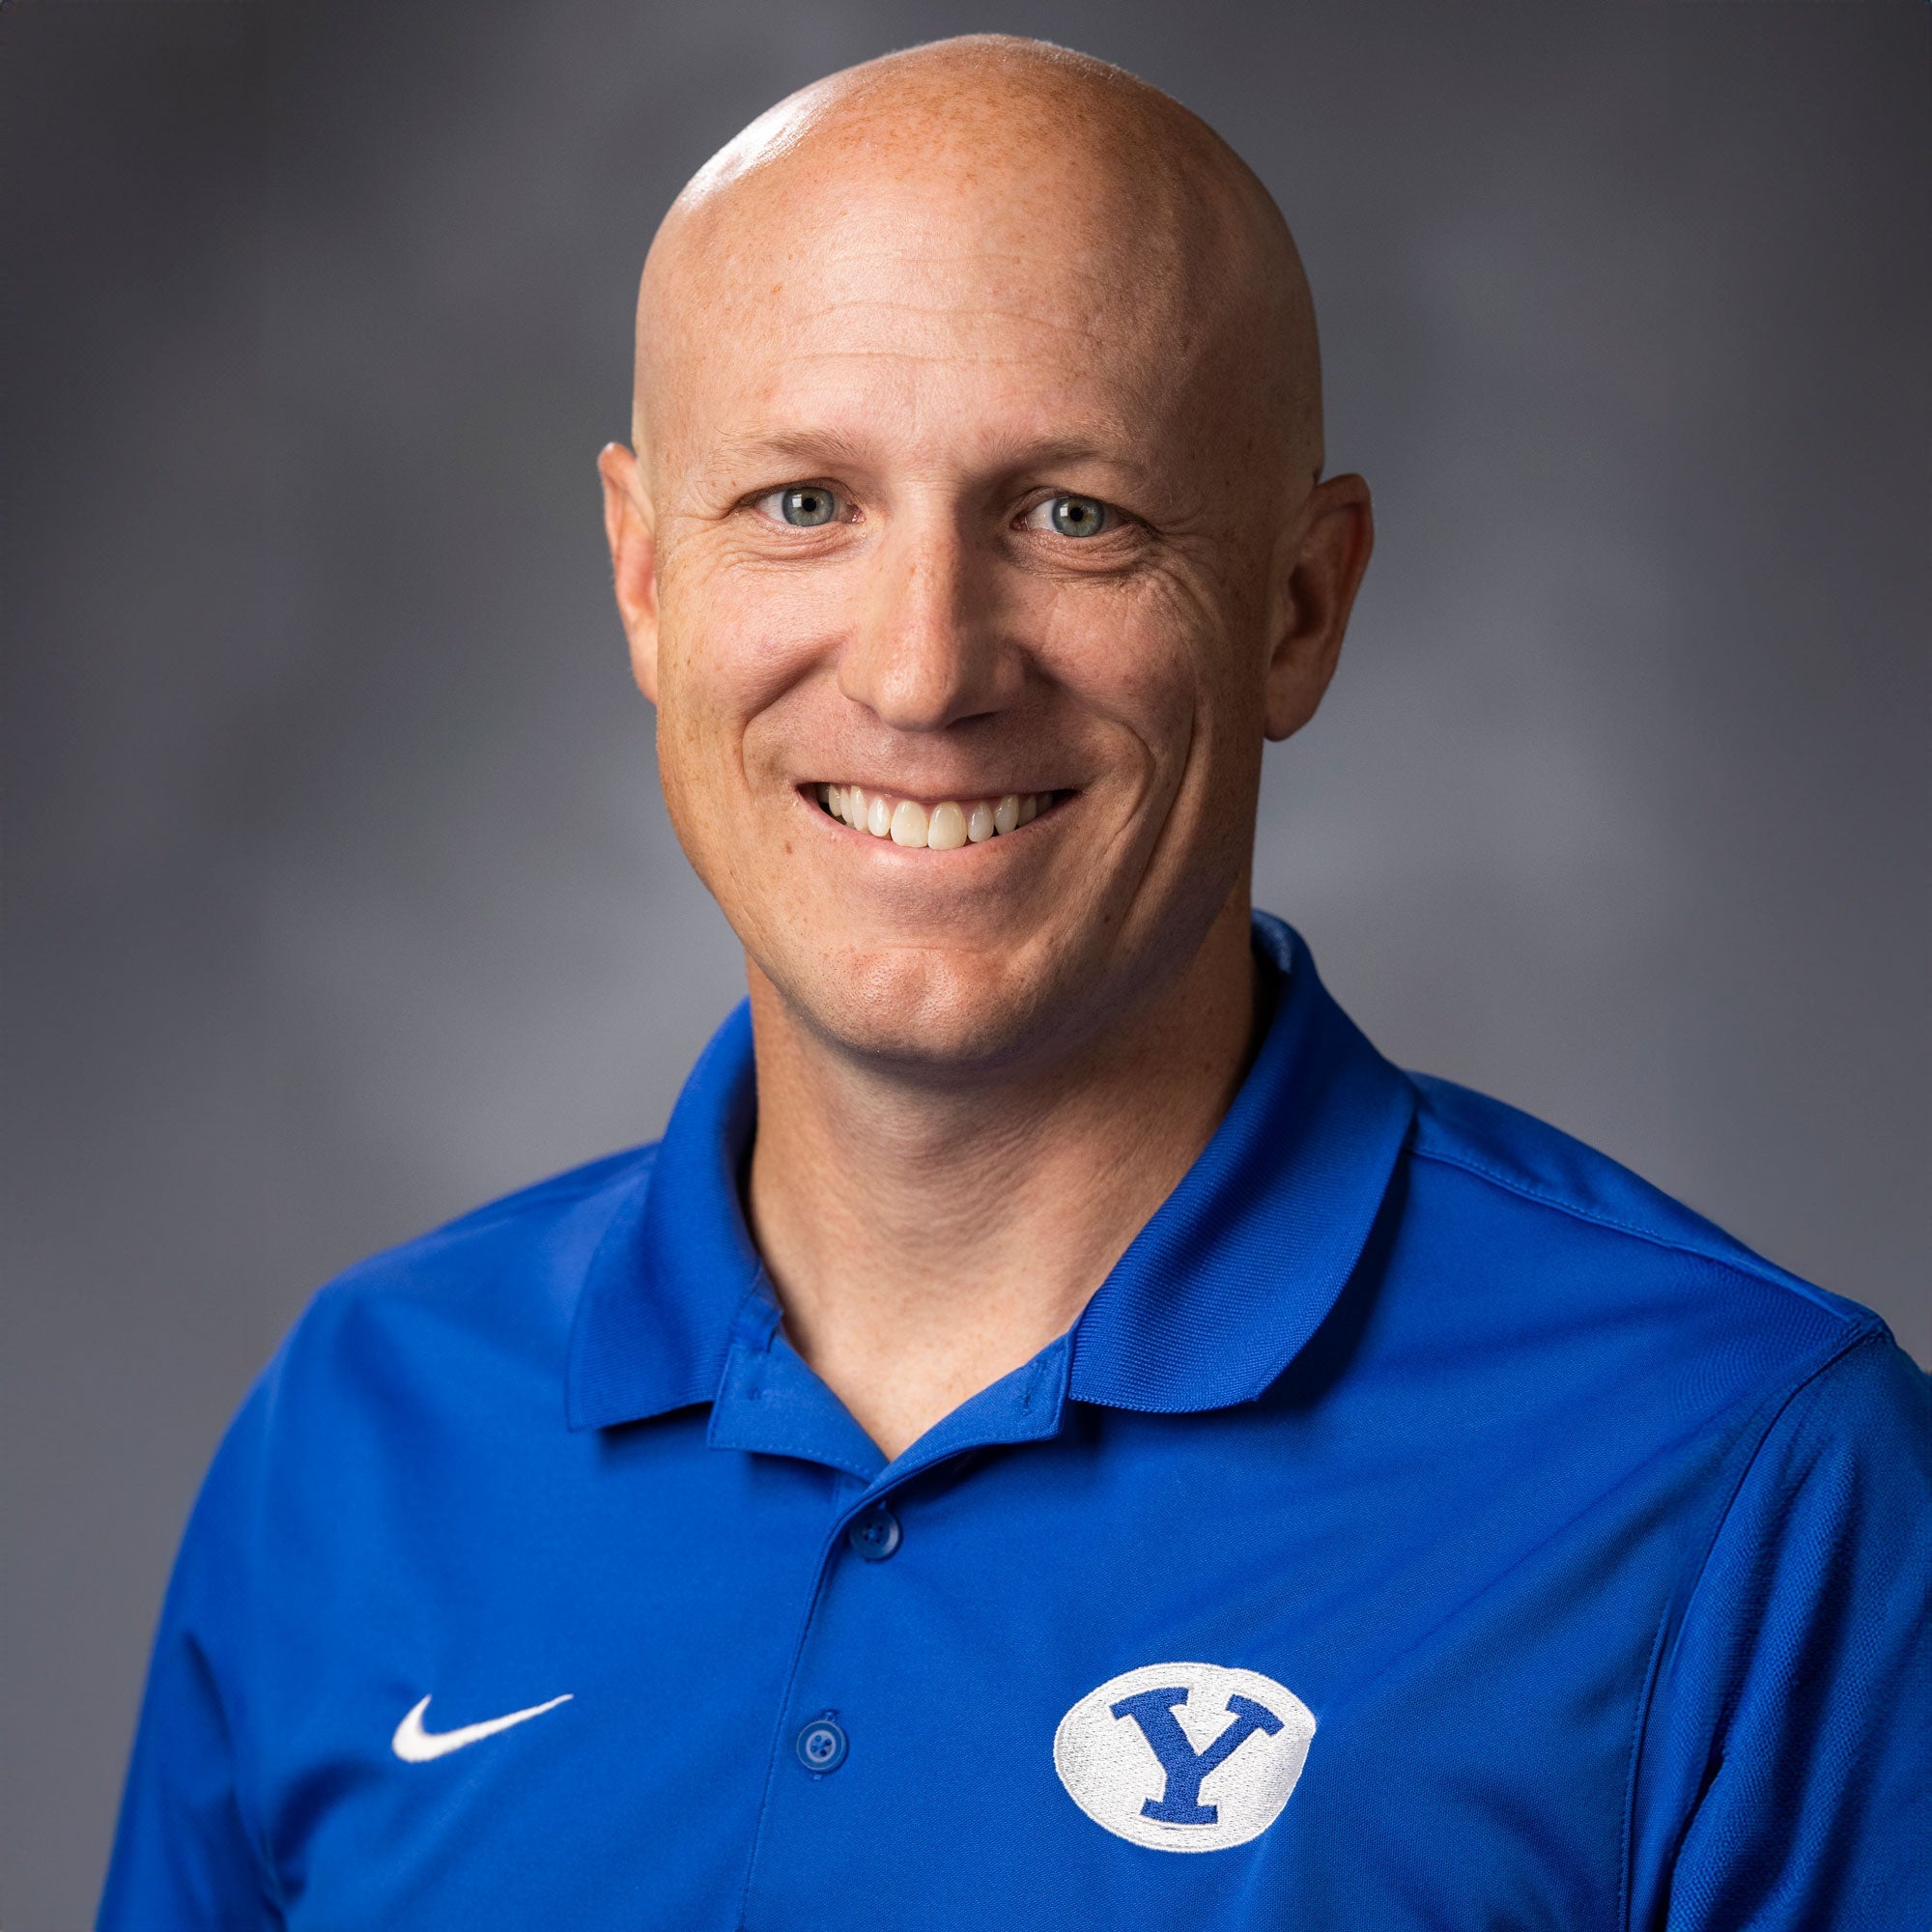 BYU ATHLETIC TRAINER, BETTERGUARDS